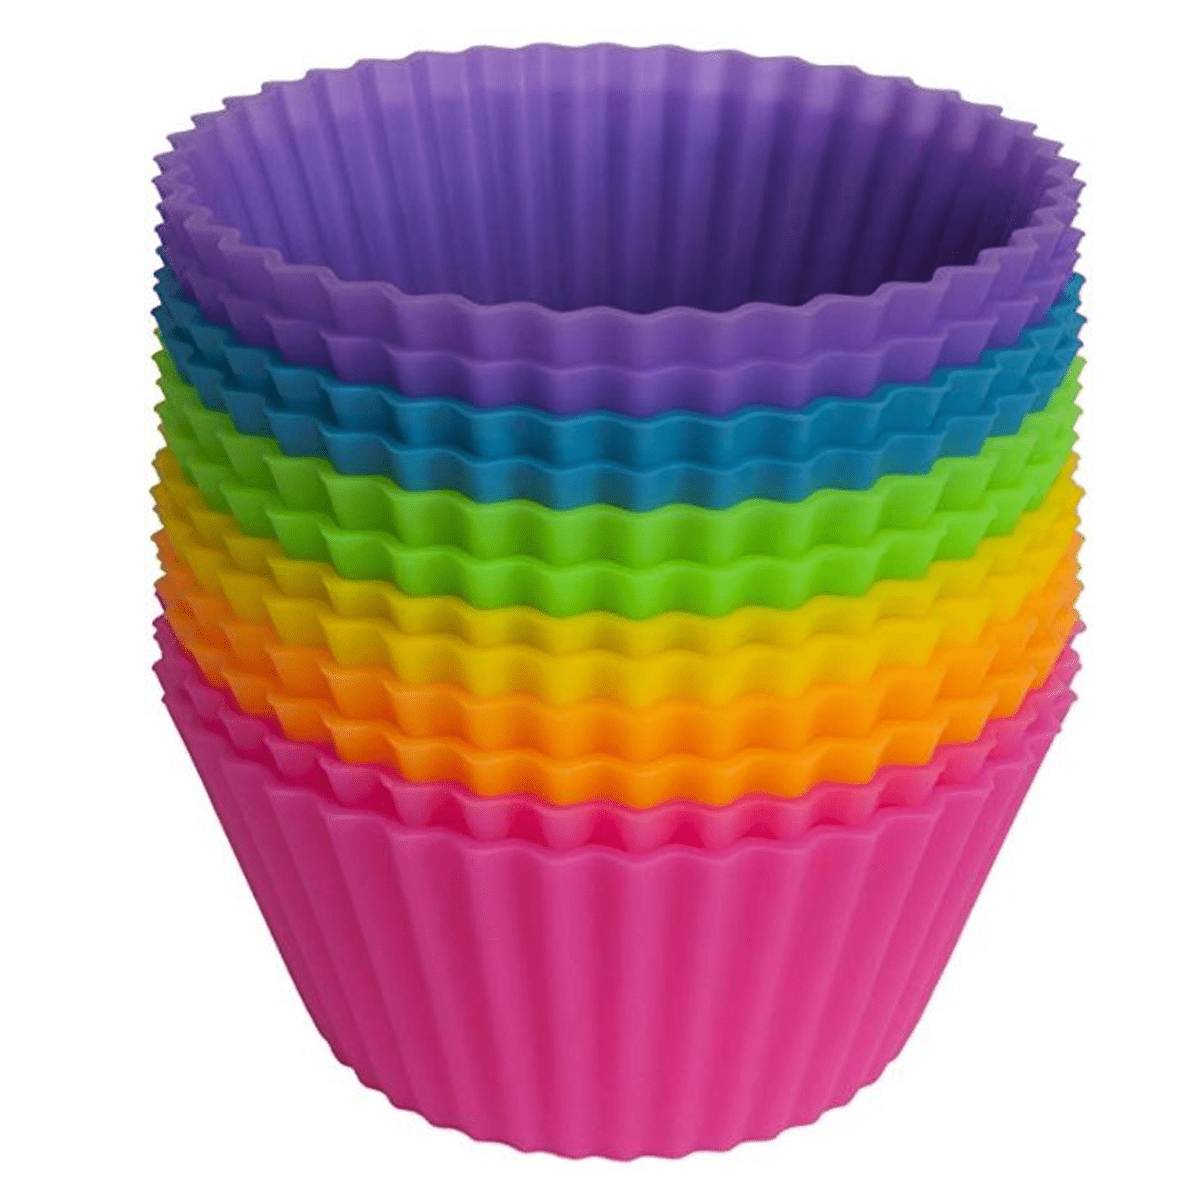 Reusable Silicone Baking Cups - Set of 12